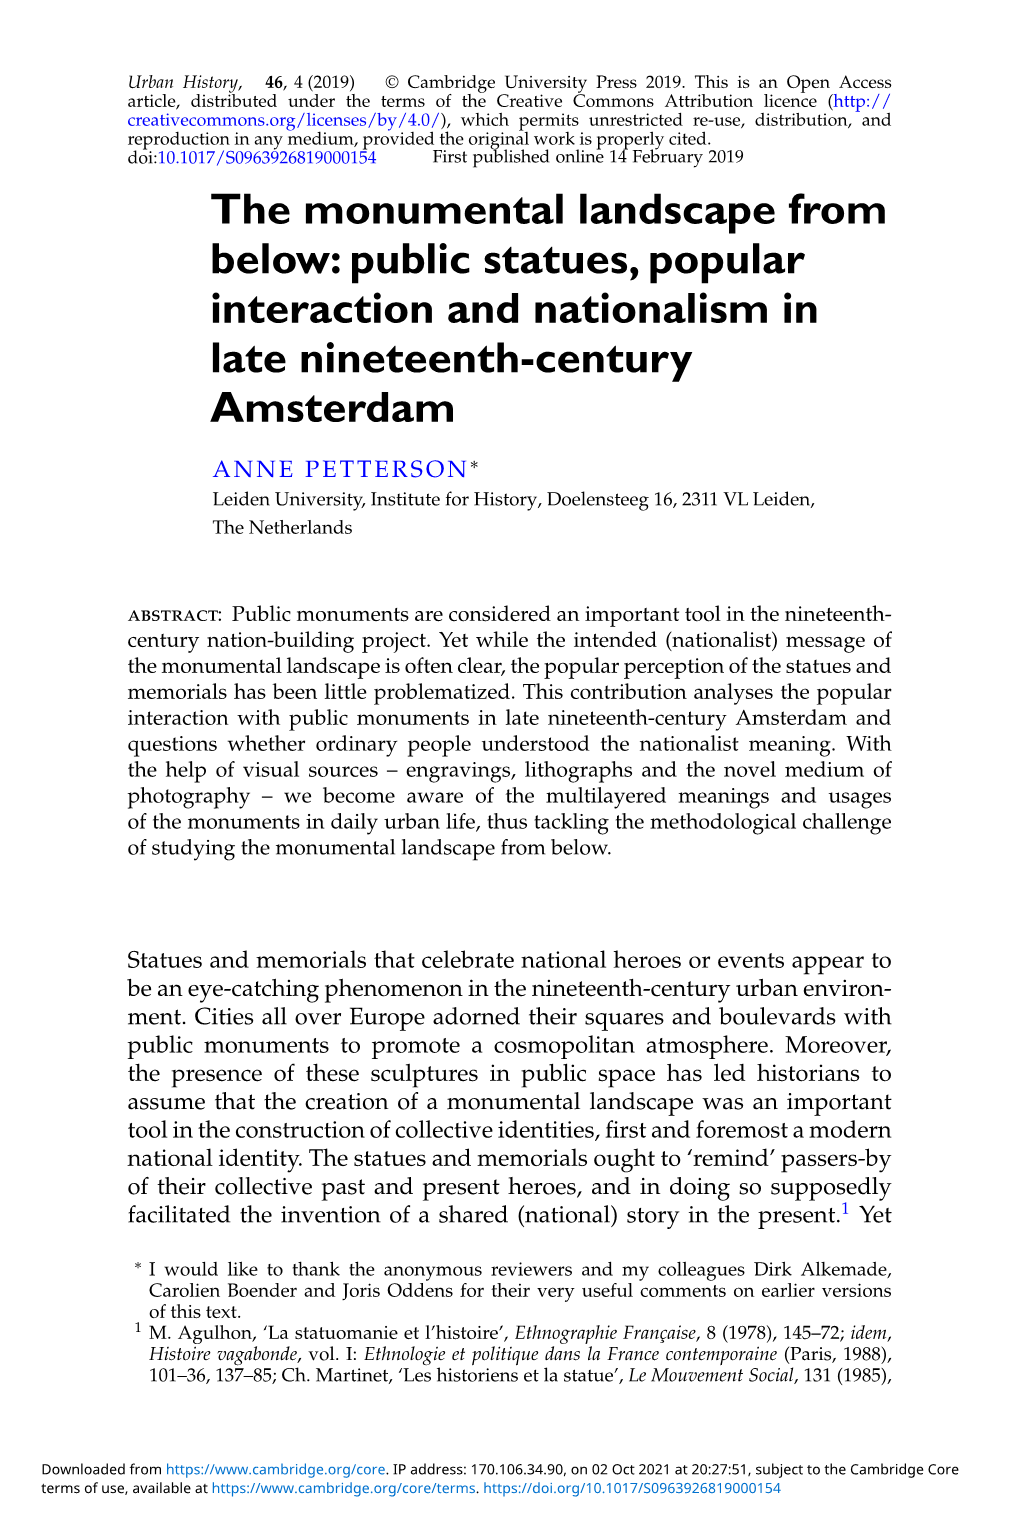 The Monumental Landscape from Below: Public Statues, Popular Interaction and Nationalism in Late Nineteenth-Century Amsterdam